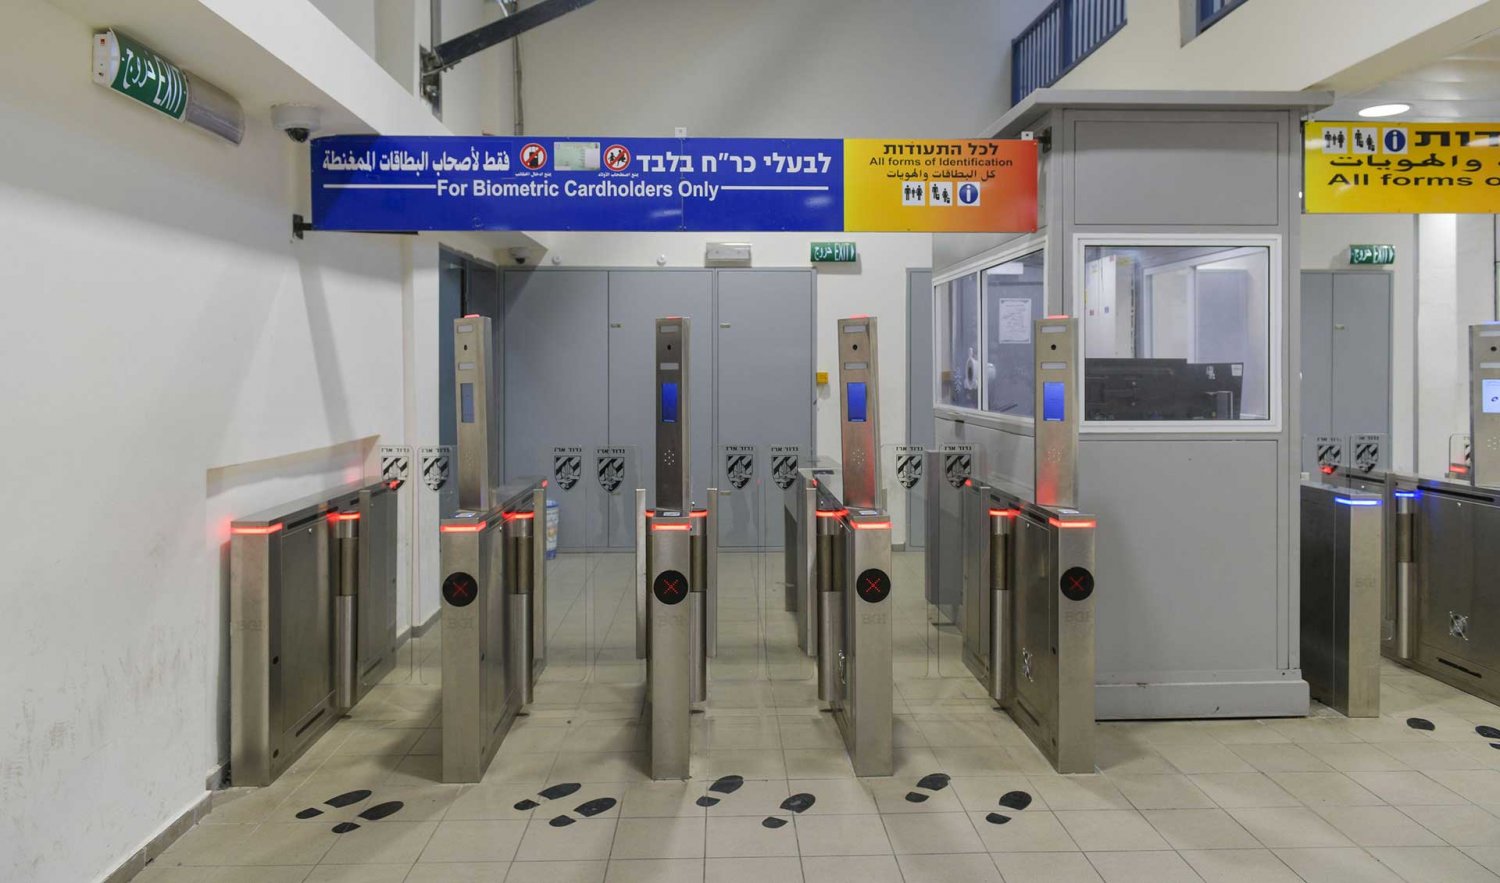 New “modernized” turnstiles recently installed at Checkpoint 300